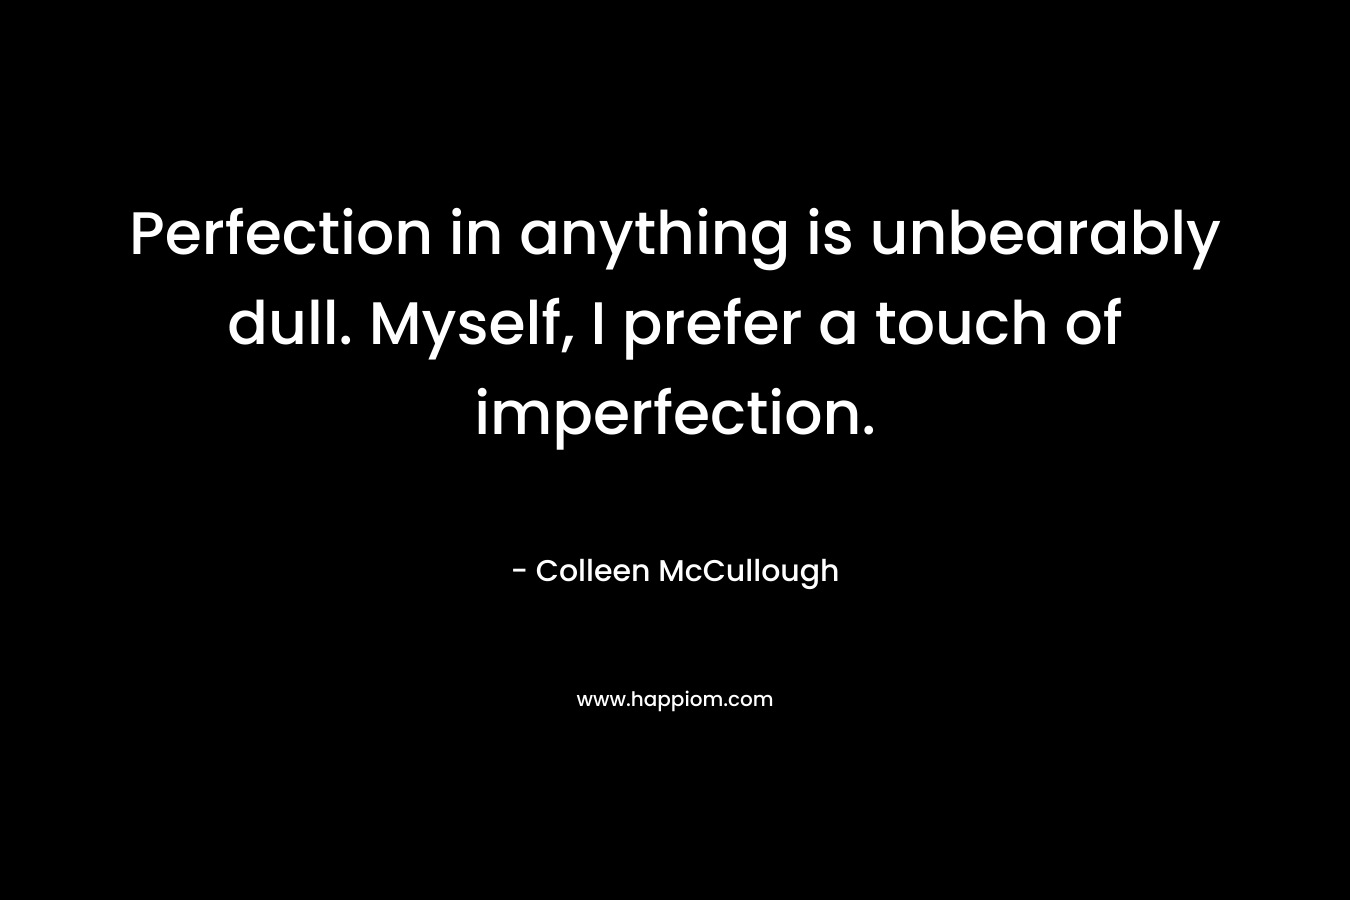 Perfection in anything is unbearably dull. Myself, I prefer a touch of imperfection.